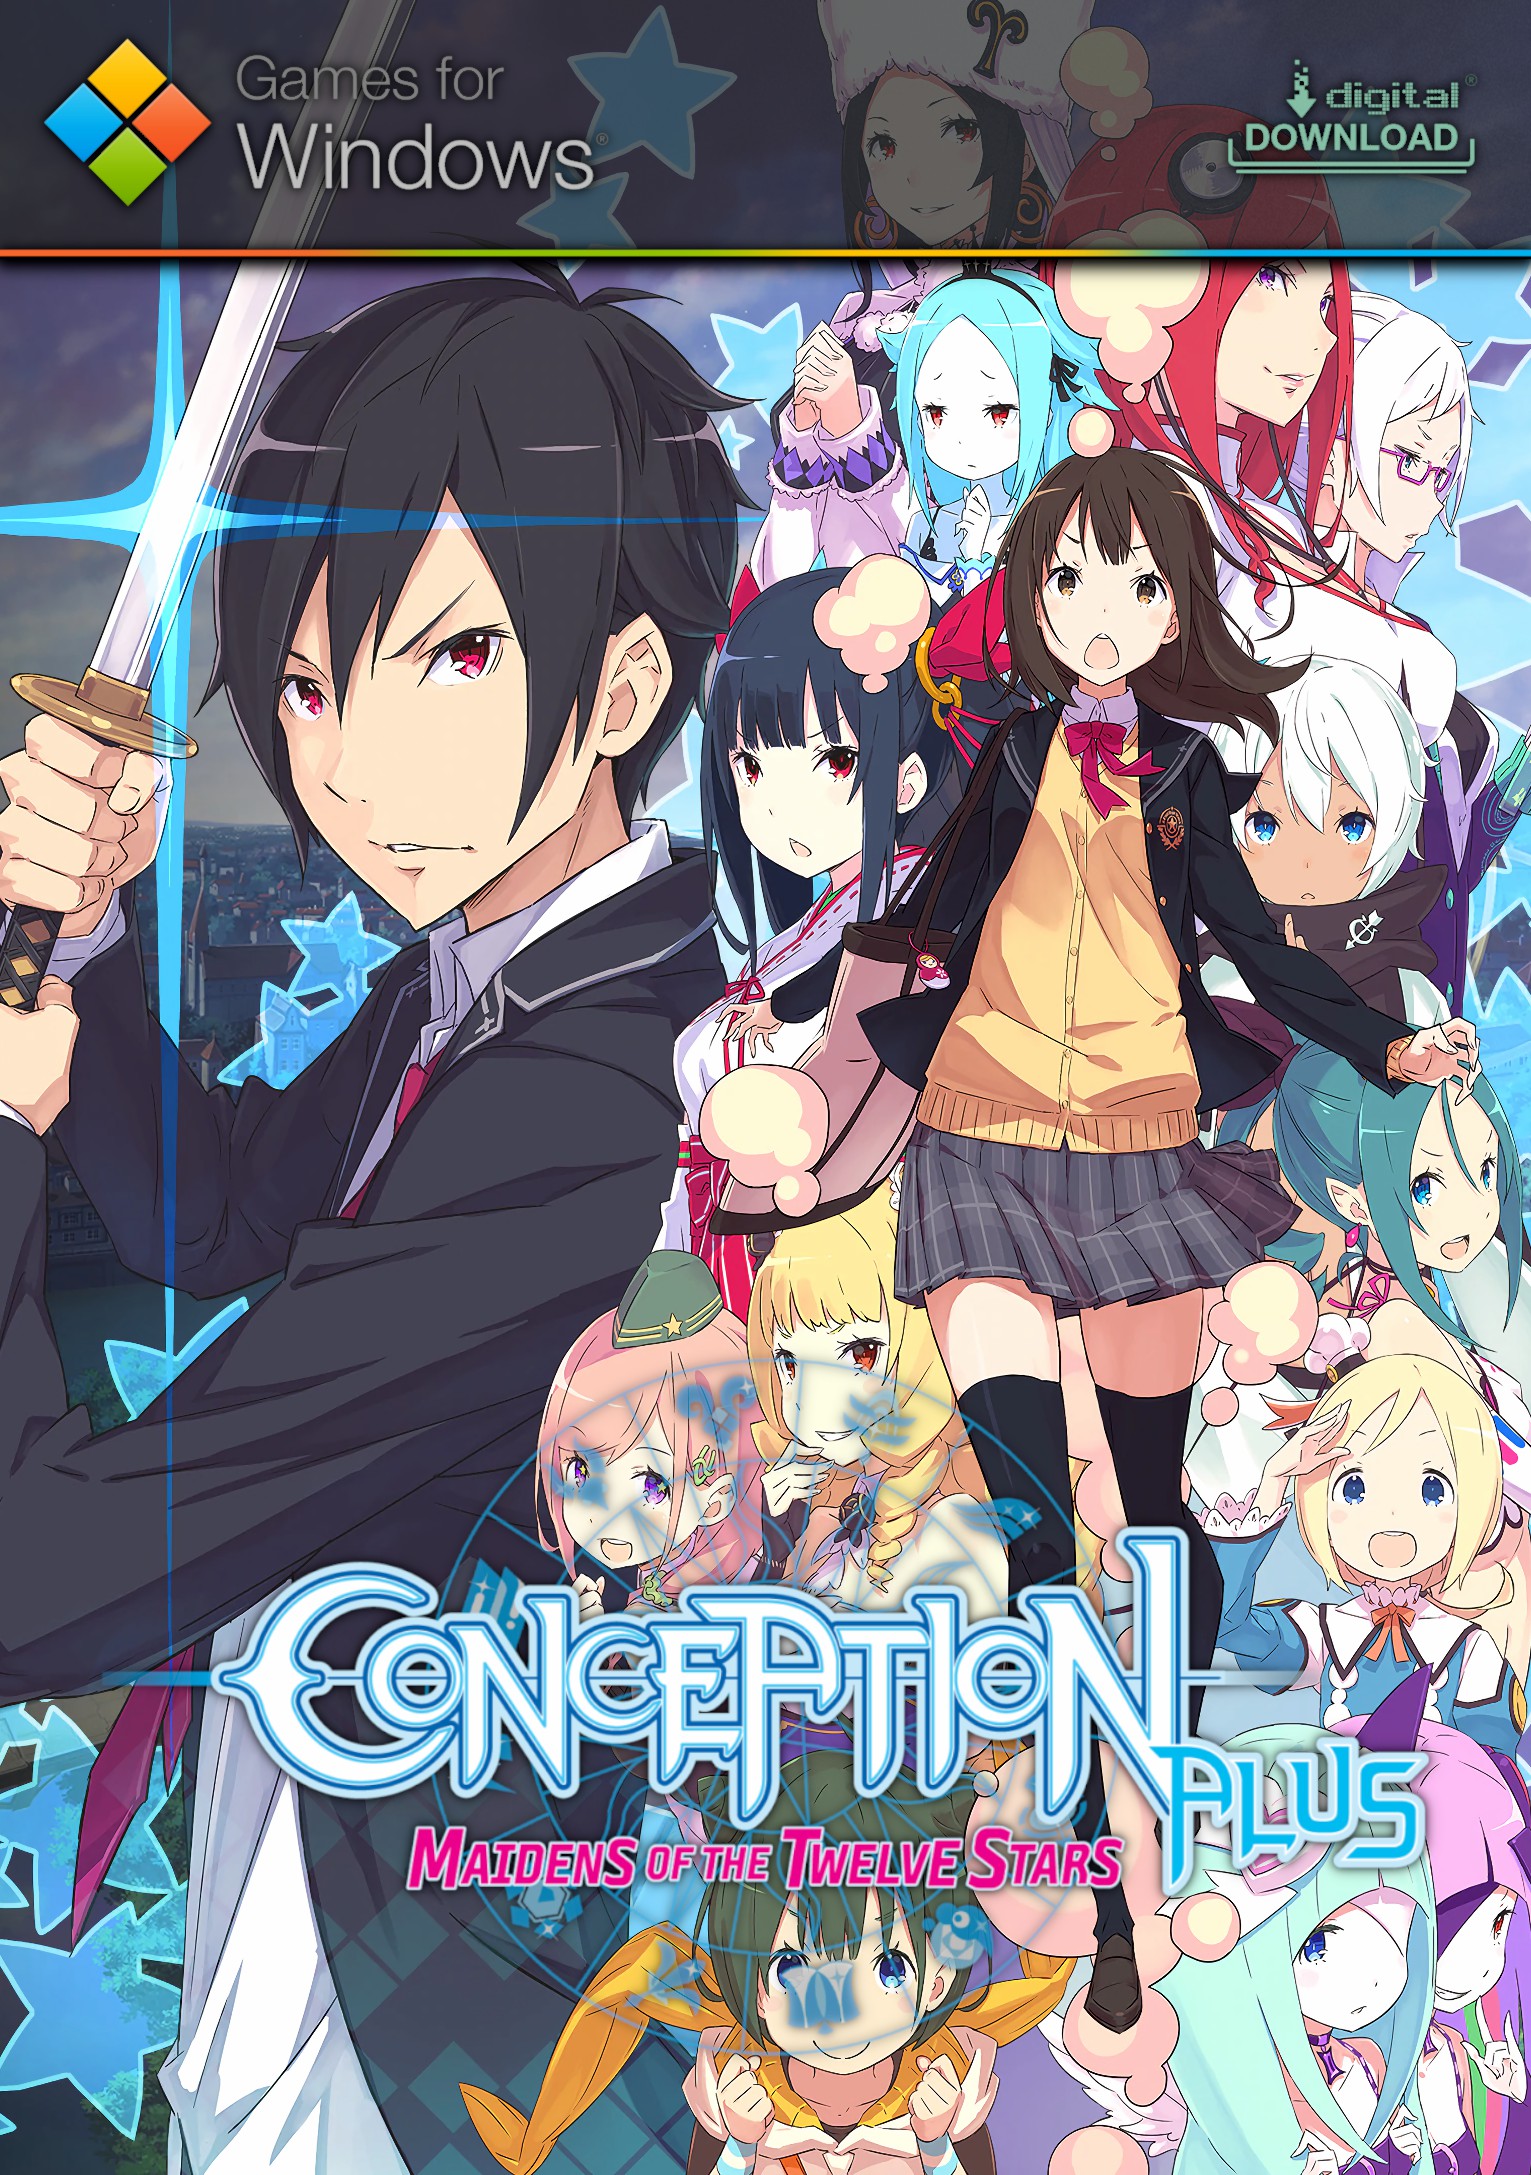 Conception PLUS: Maidens of the Twelve Stars Game's Launch Trailer